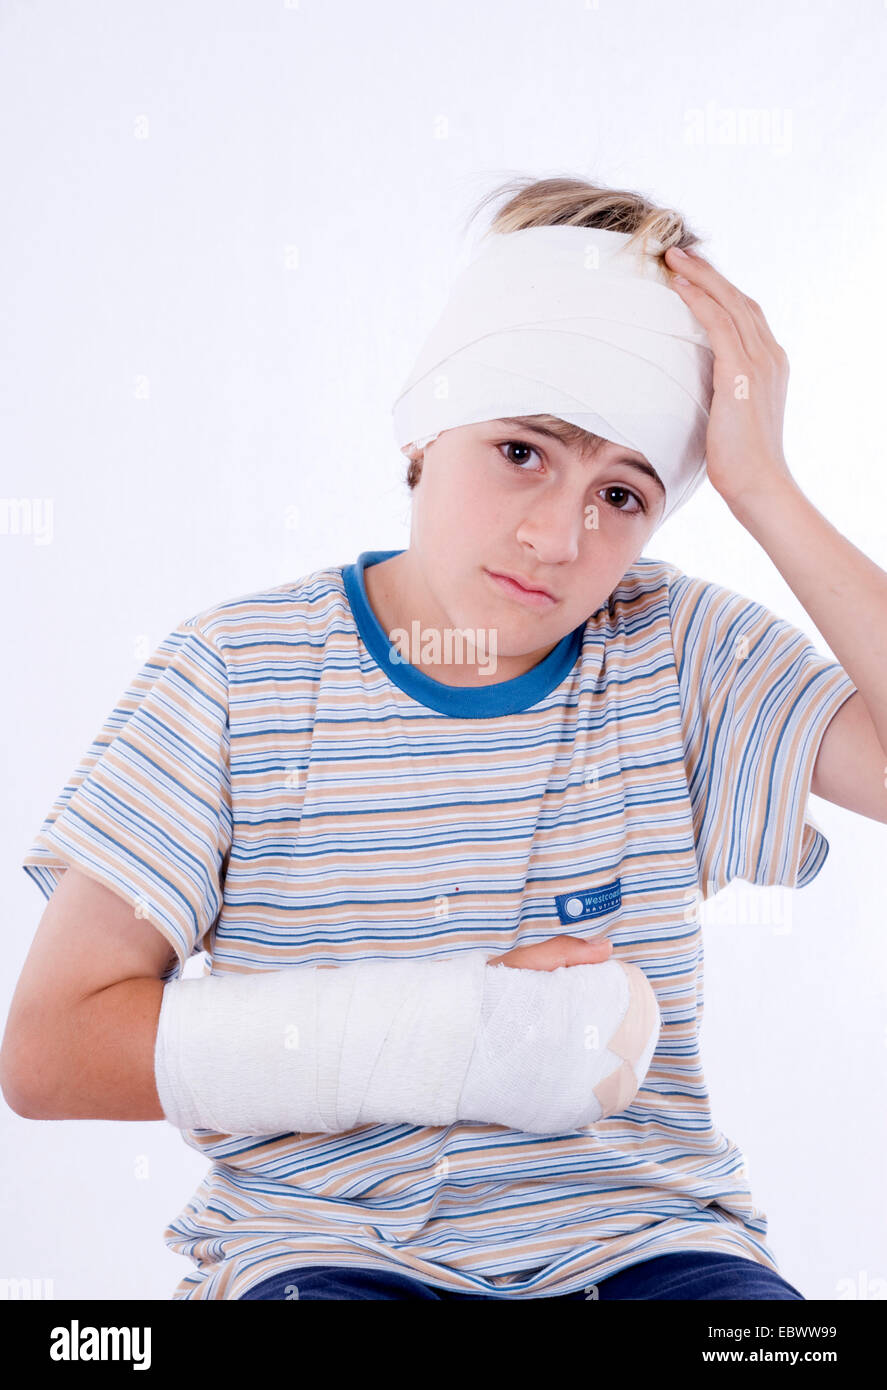 boy with arm in plaster and bandage on head Stock Photo